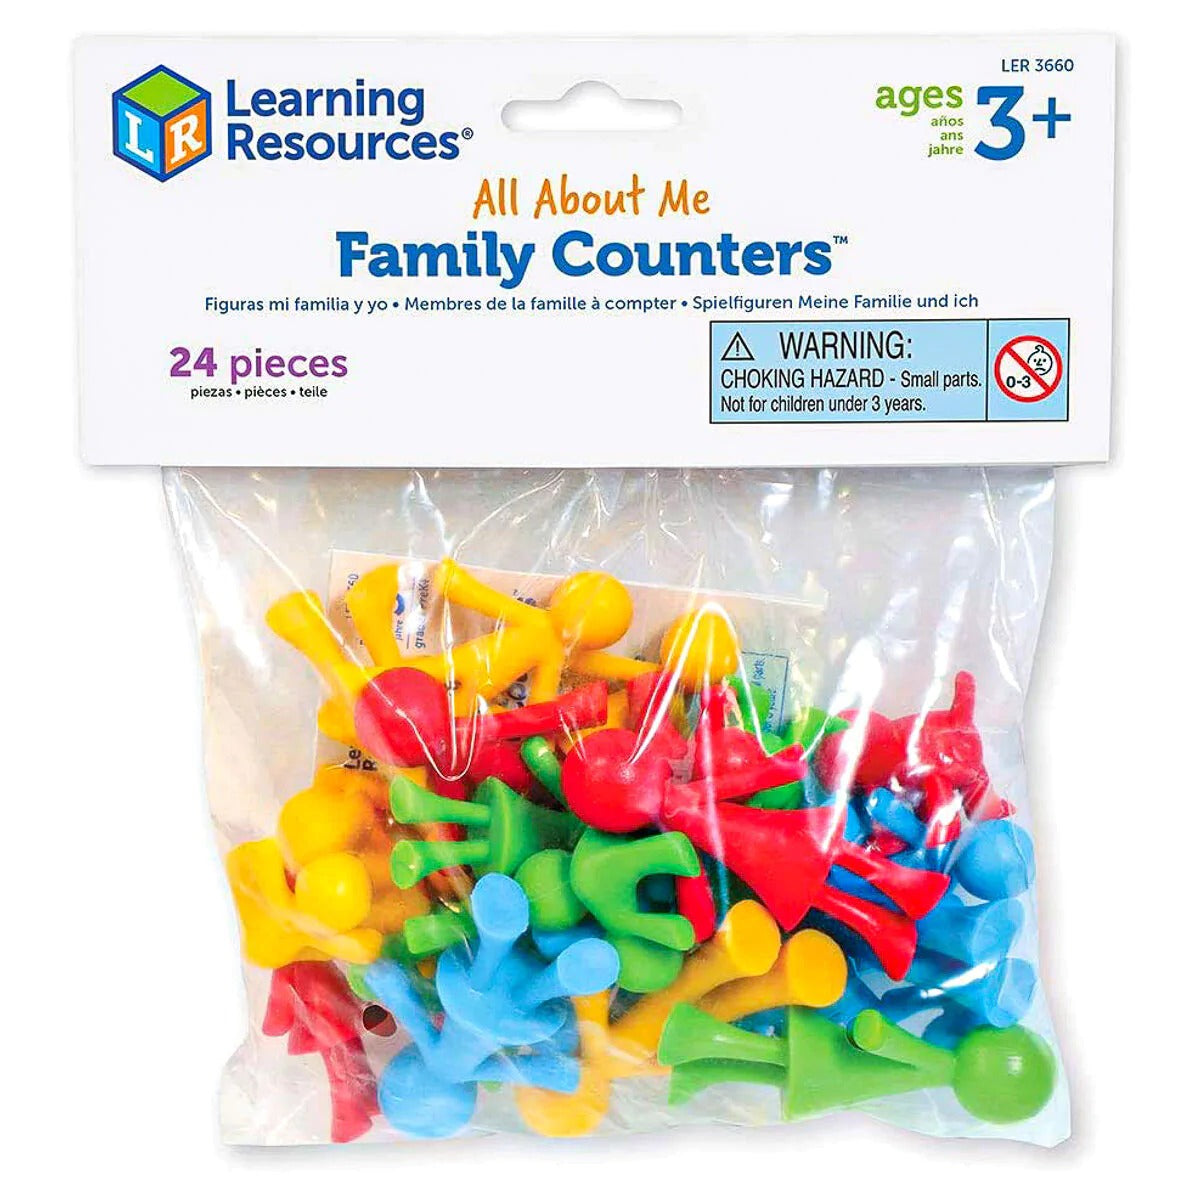 All About Me Family Counters 24 Pack, Introduce your child to the fascinating world of numbers and social understanding with the All About Me Family Counters 24 Pack. This resource is more than just a set of colourful counters; it's an invaluable educational tool that bridges the gap between mathematical learning and emotional development. Whether you are focusing on "All About Me" themed lessons, understanding family dynamics, or grasping essential numeracy skills, this 24-pack has you covered. It includes